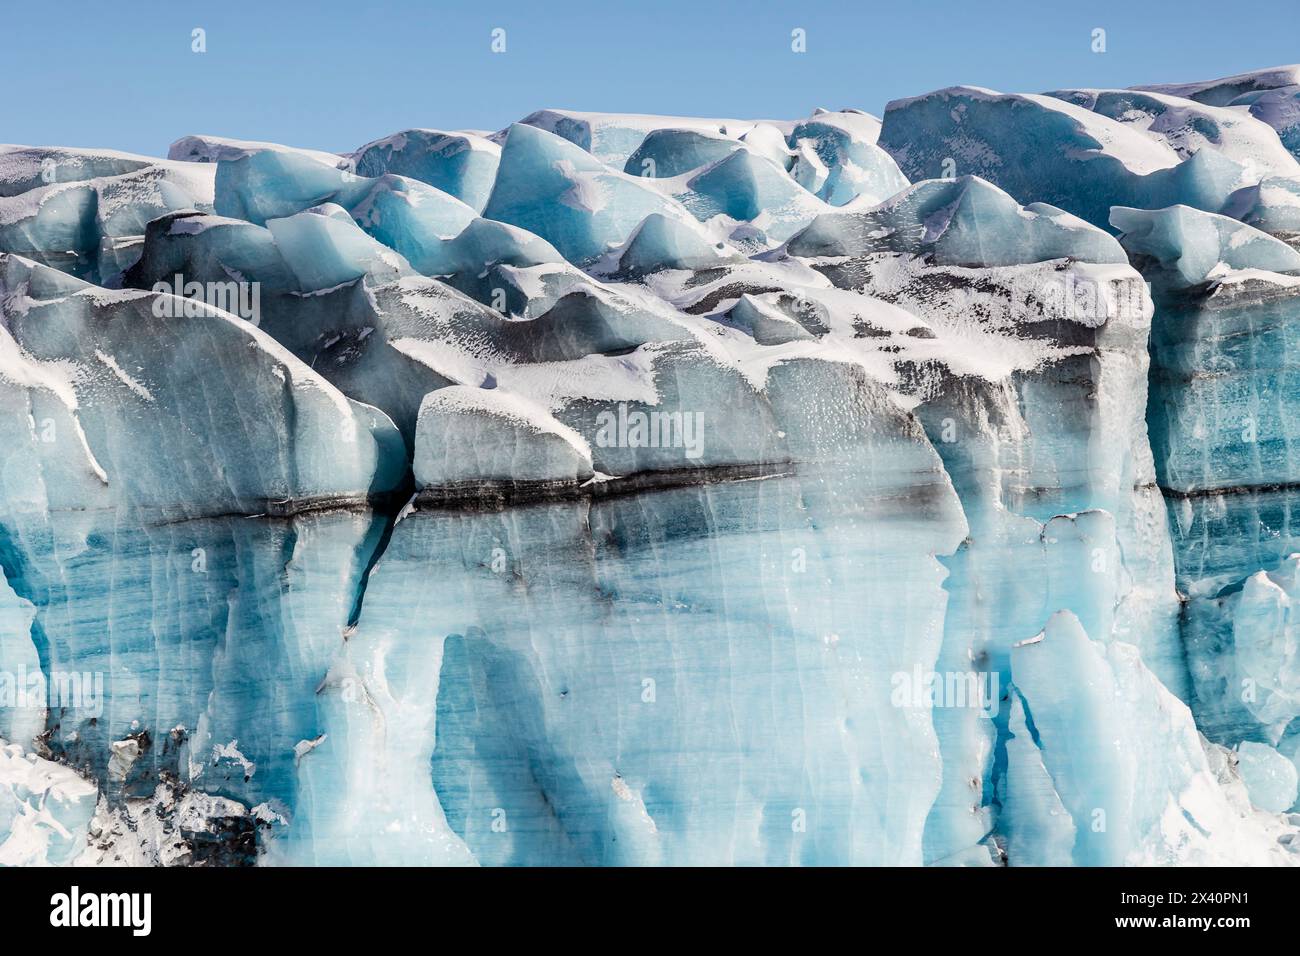 Blue ice formations on Knik glacier against a bright blue sky; Alaska, United States of America Stock Photo